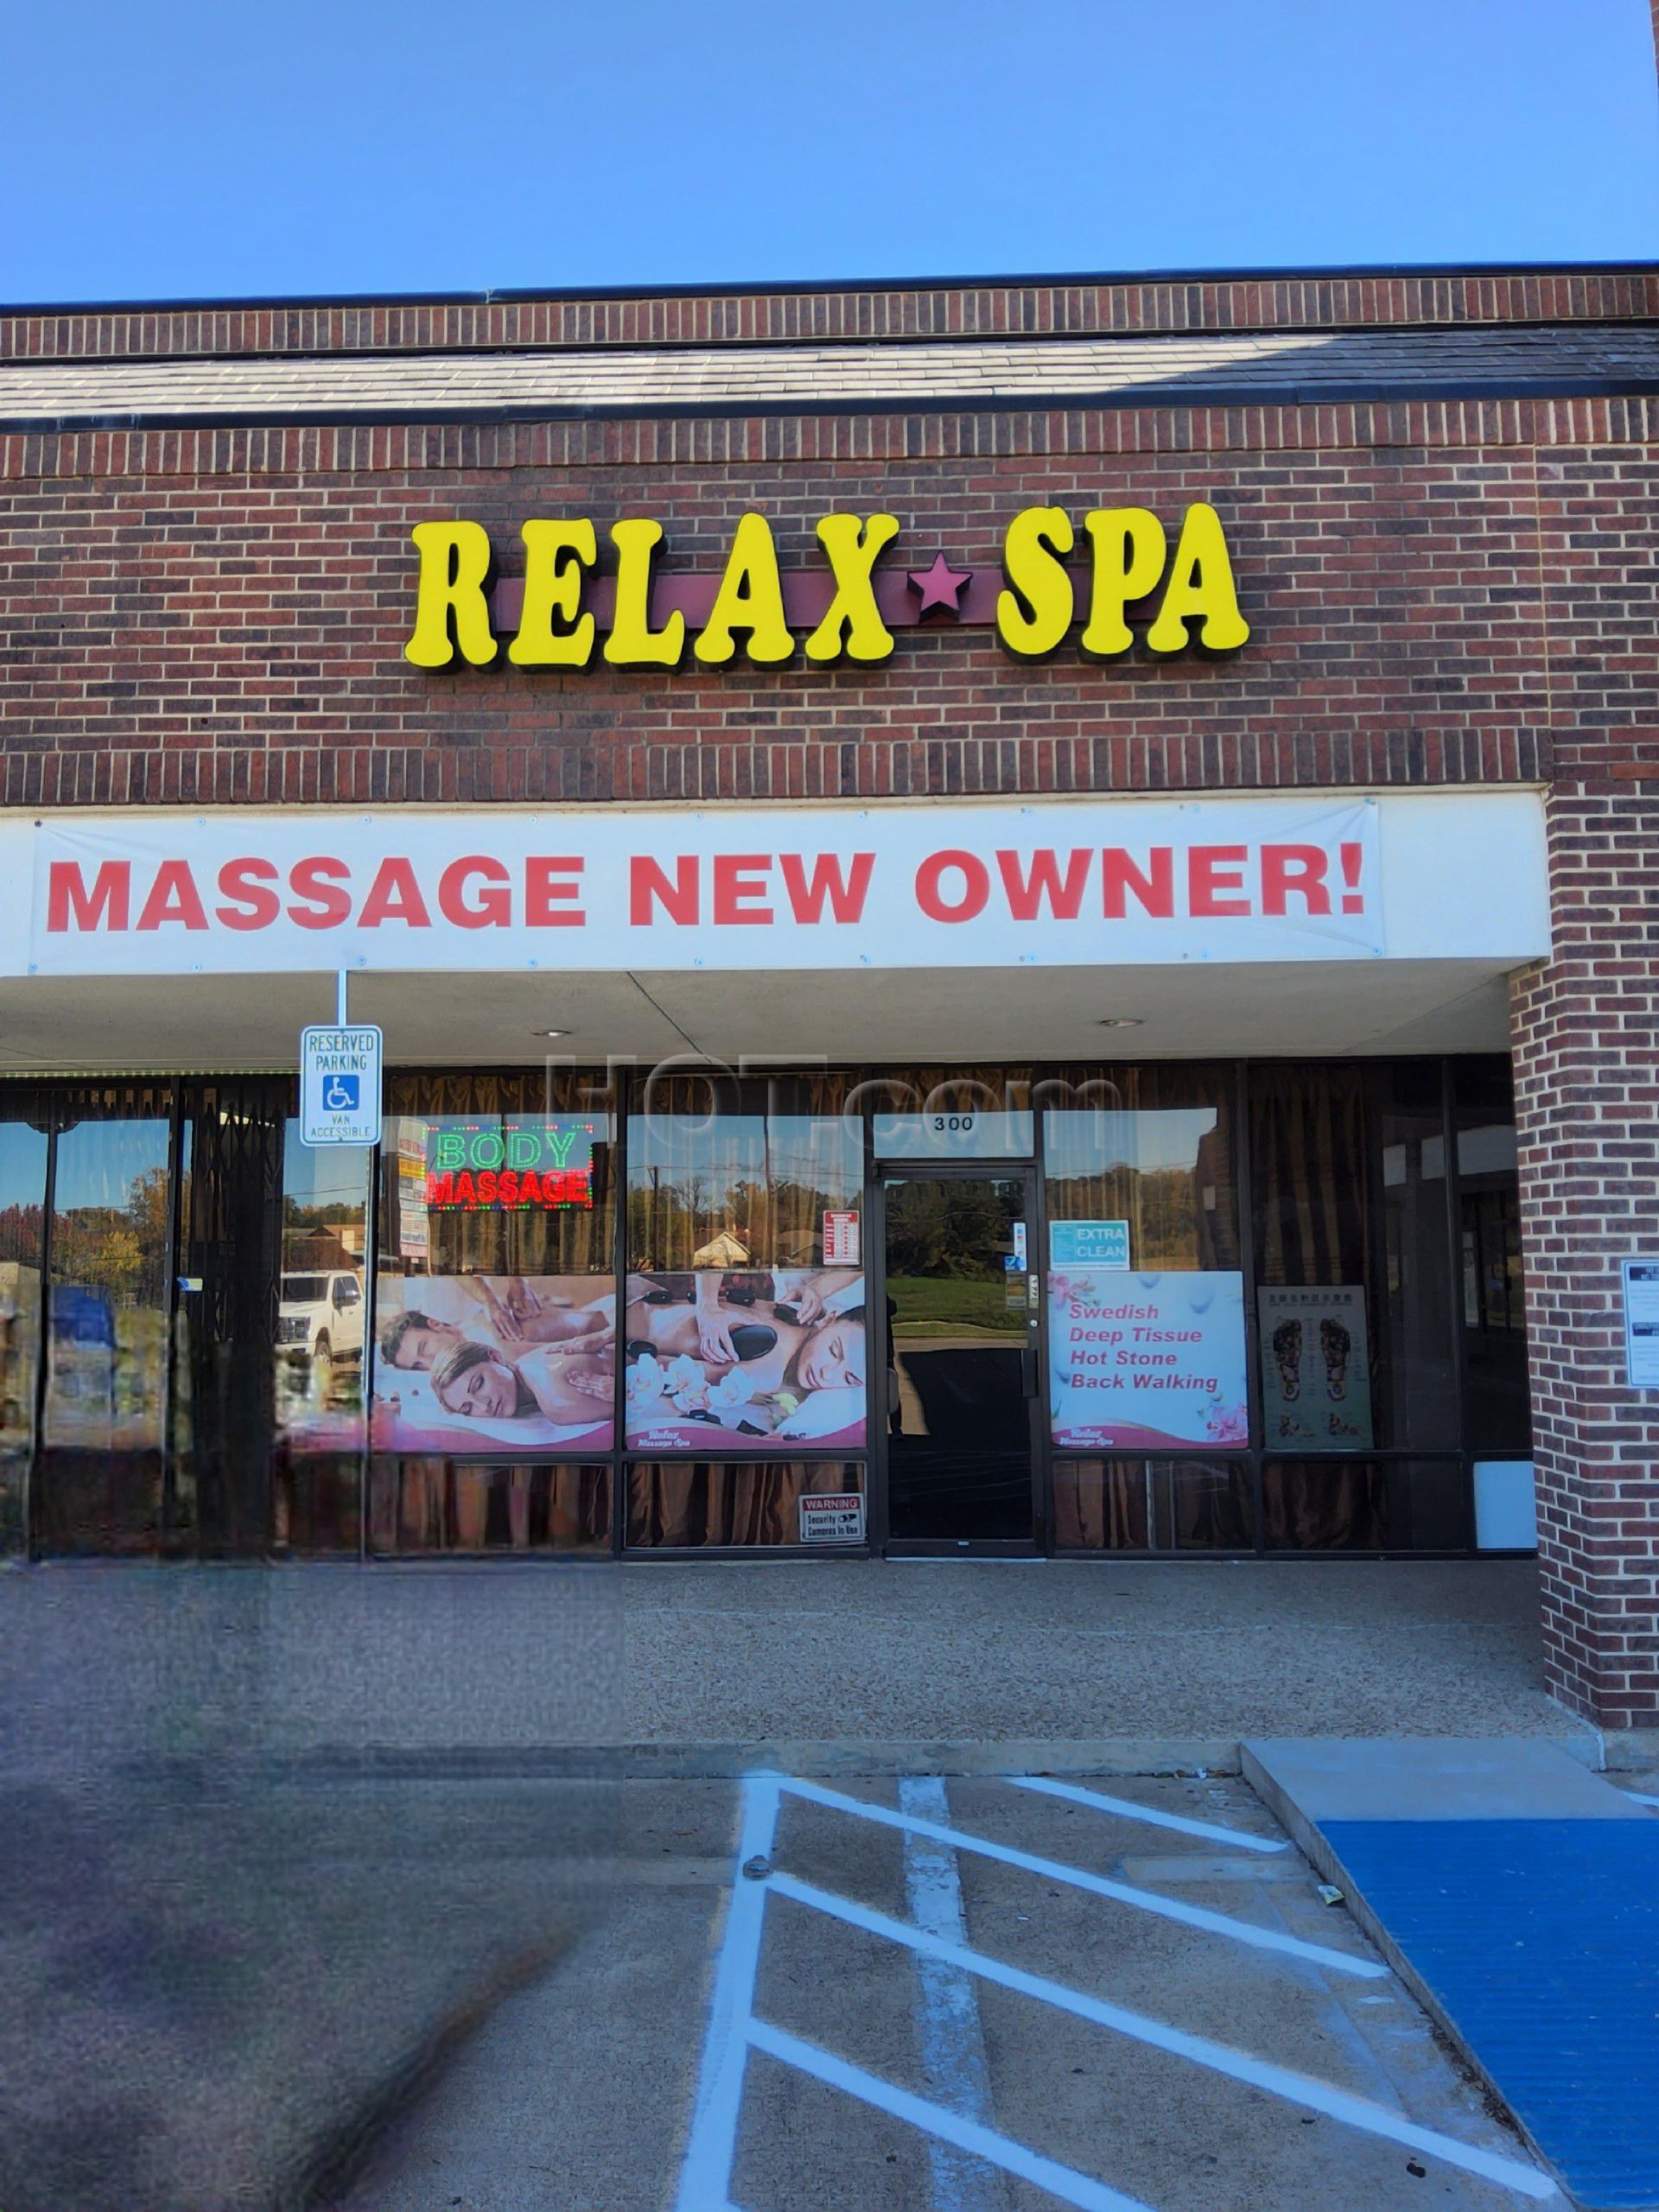 Fort Worth, Texas Relax Spa